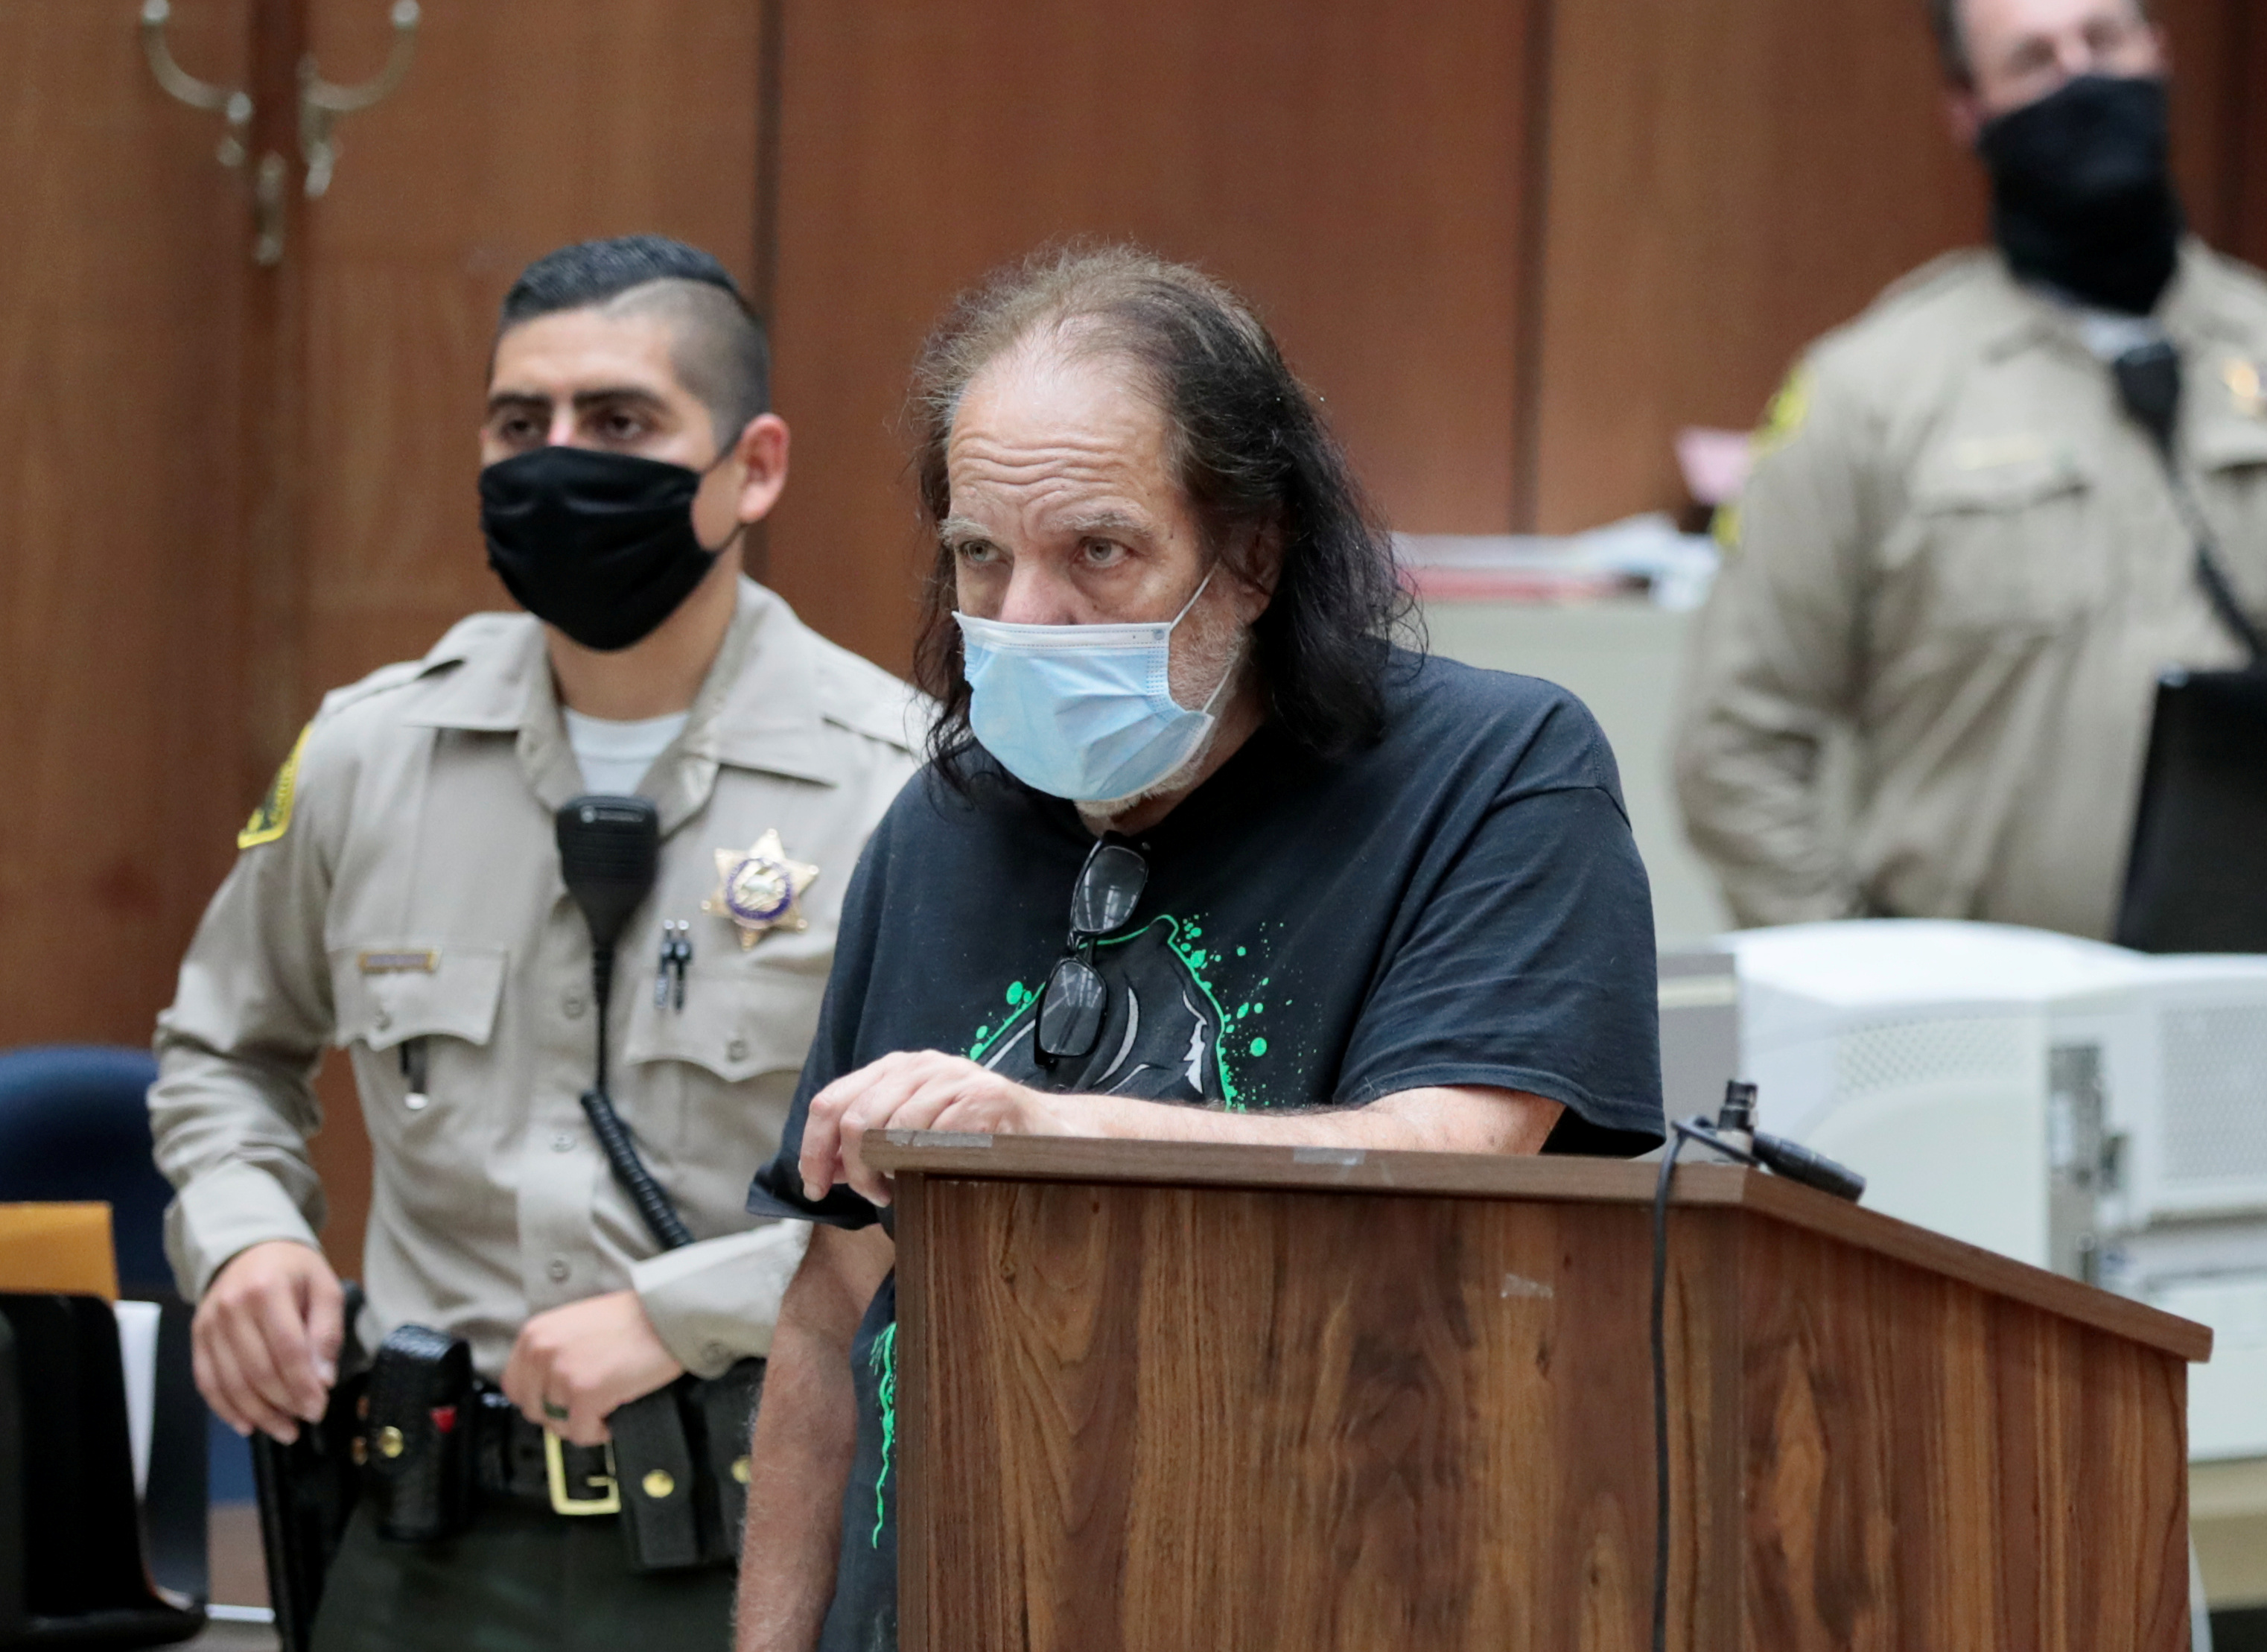 Porn star Ron Jeremy indicted in Los Angeles on more than 30 sex charges Reuters image